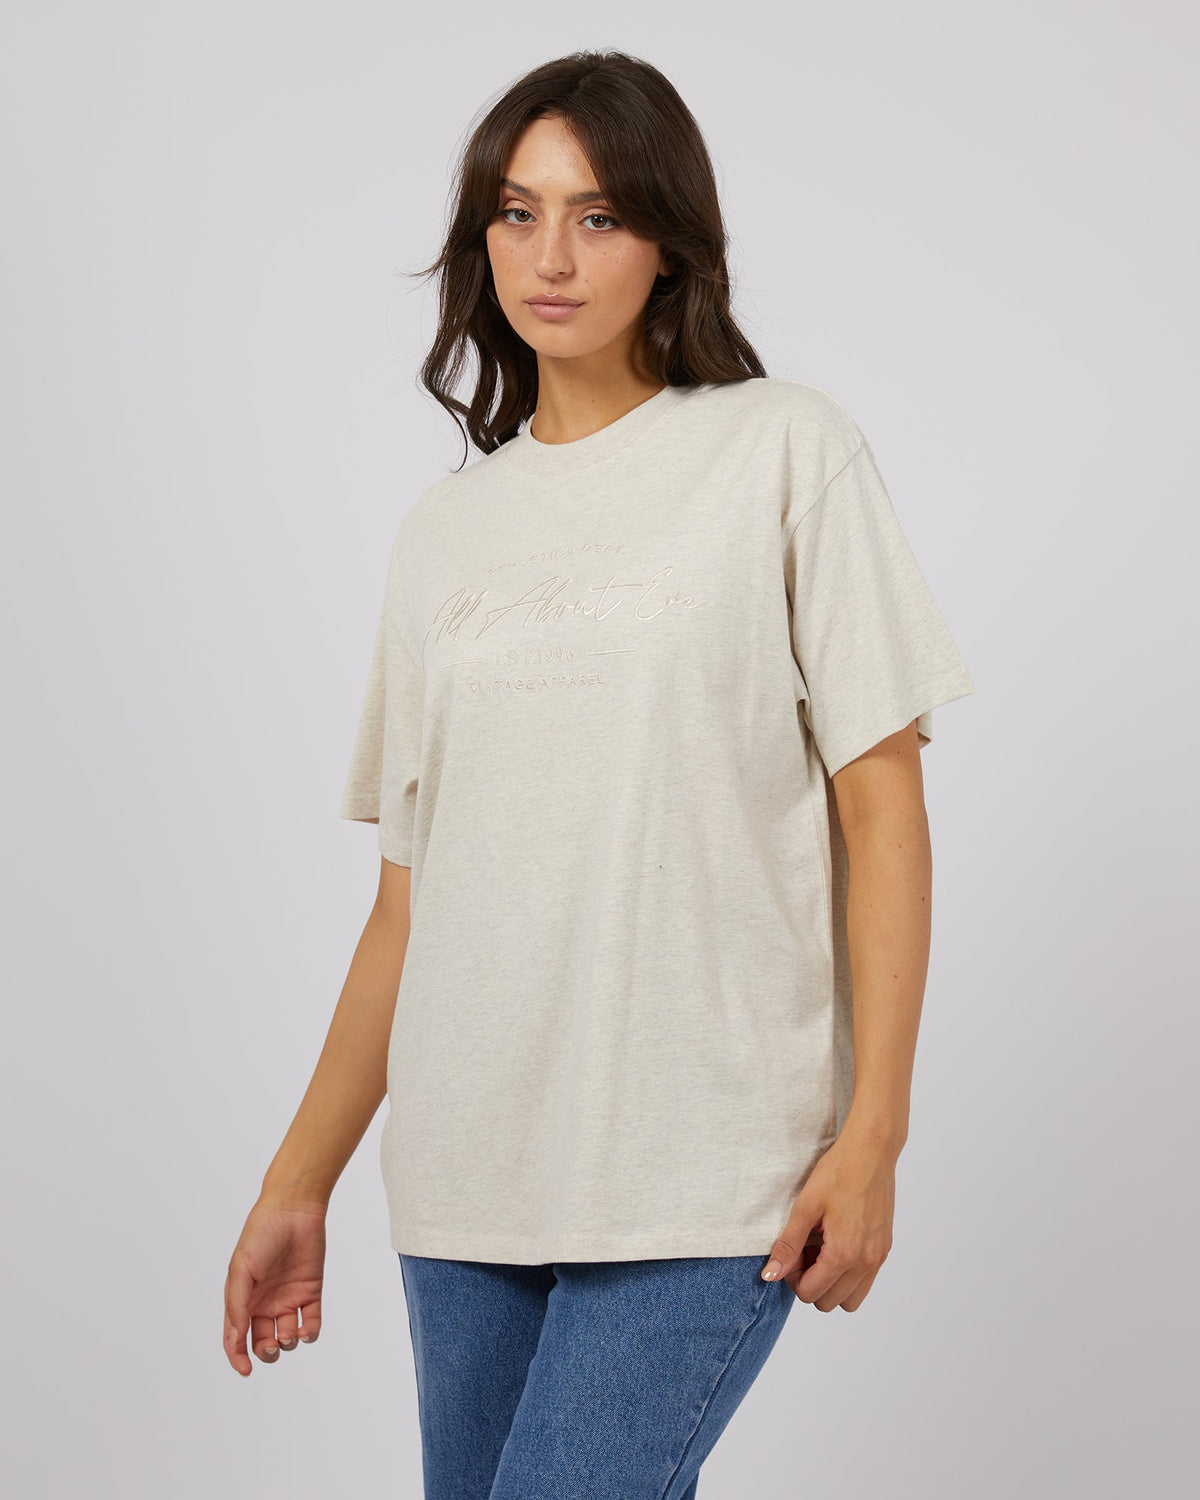 All About Eve-Classic Tee Oatmeal-Edge Clothing